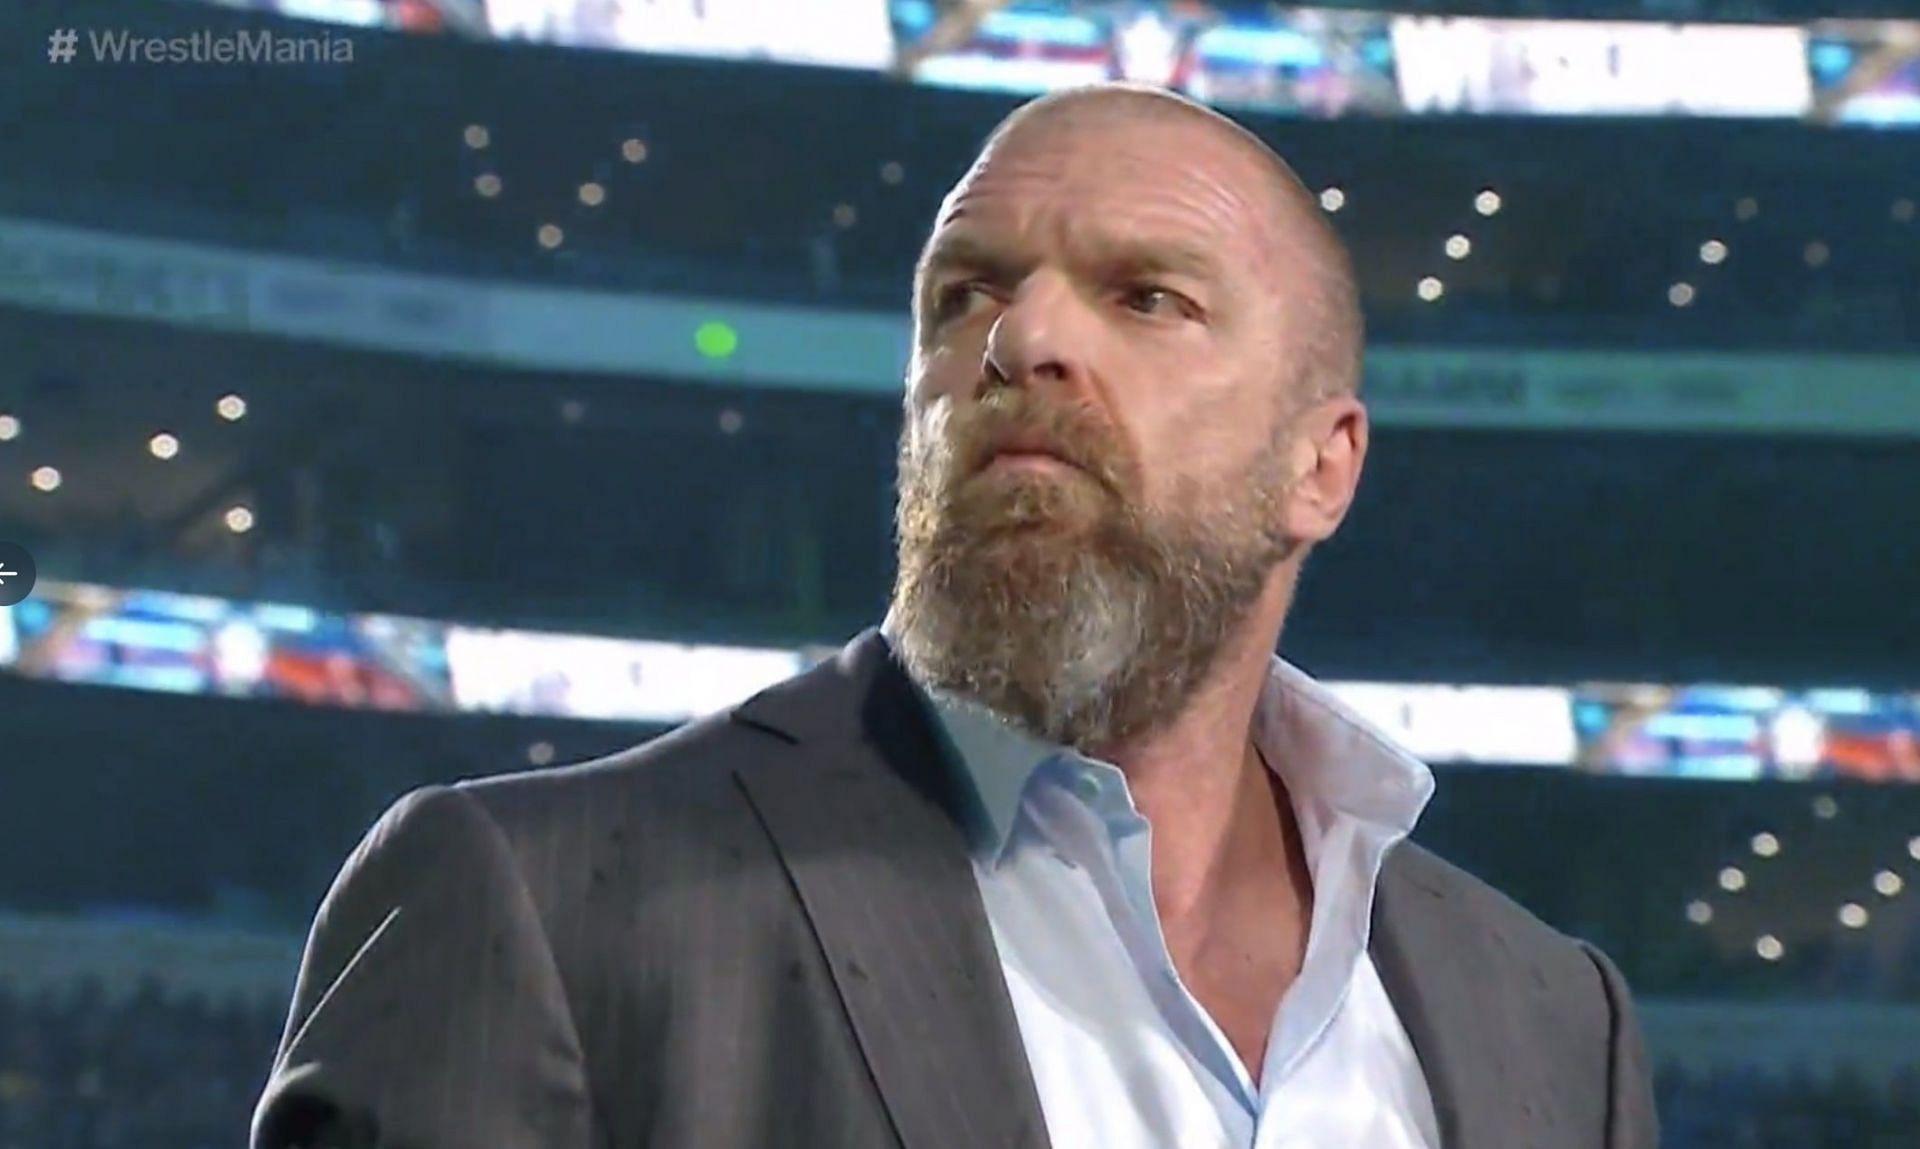 Triple H has hit the ground running as the head of the WWE